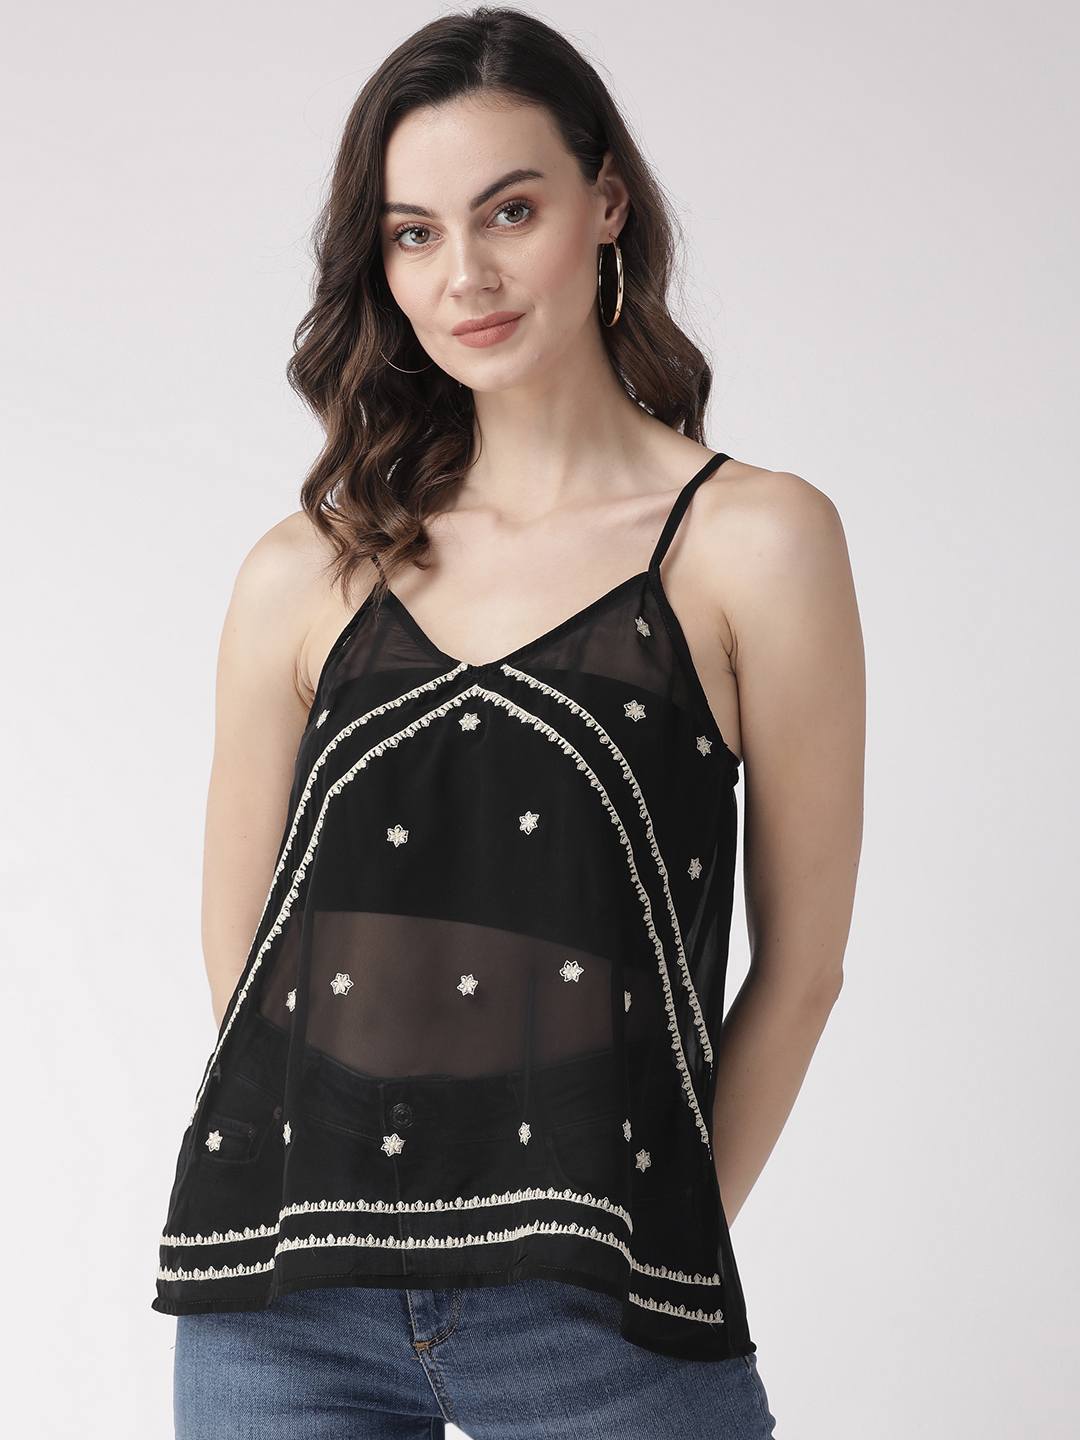 Black & White Embroidered Sheer Strappy Top